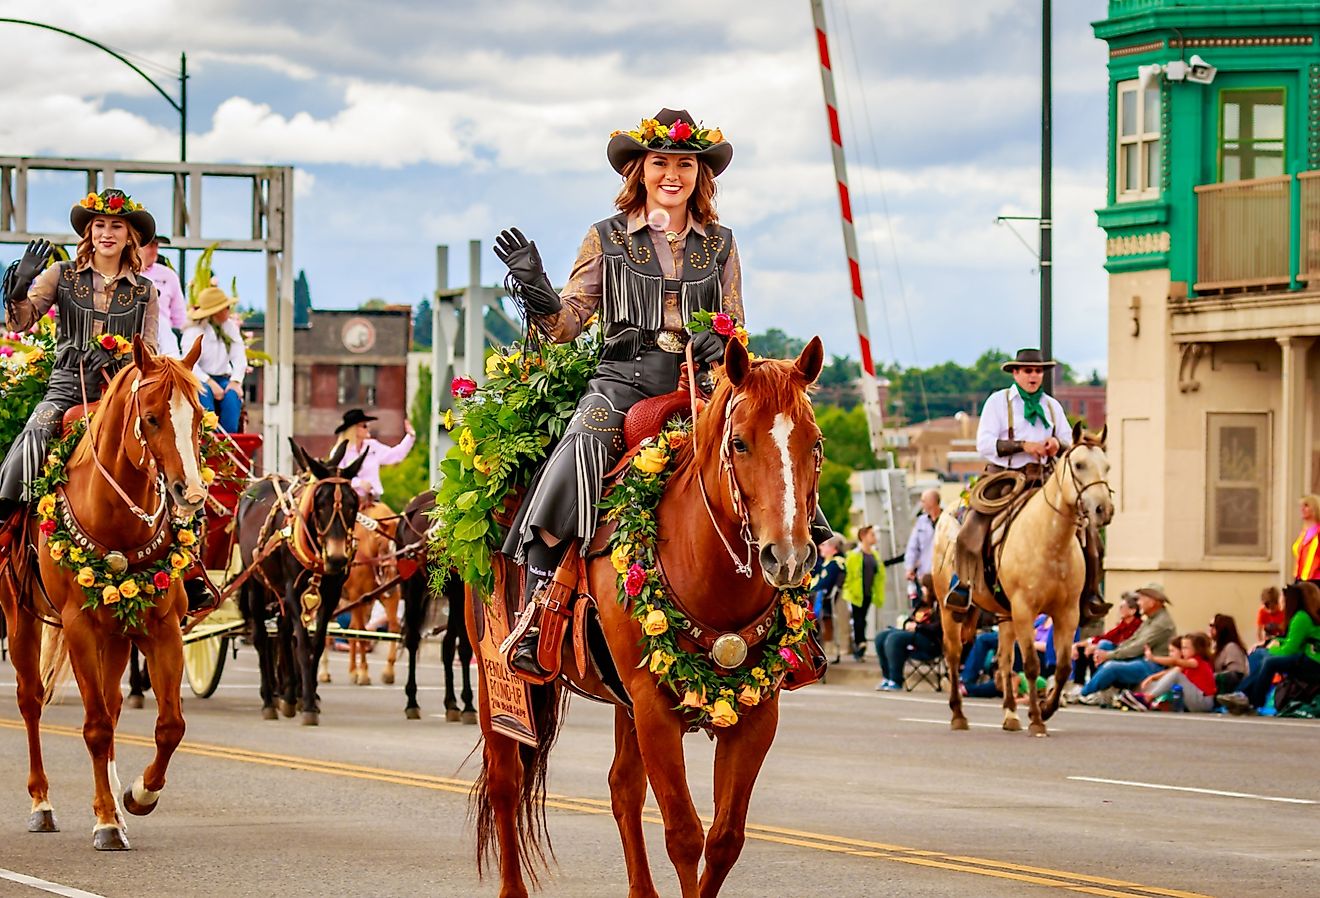 Horse riders during the lively Pendleton Round-Up in Pendleton, Oregon. Image credit: Png Studio Photography via Shutterstock.